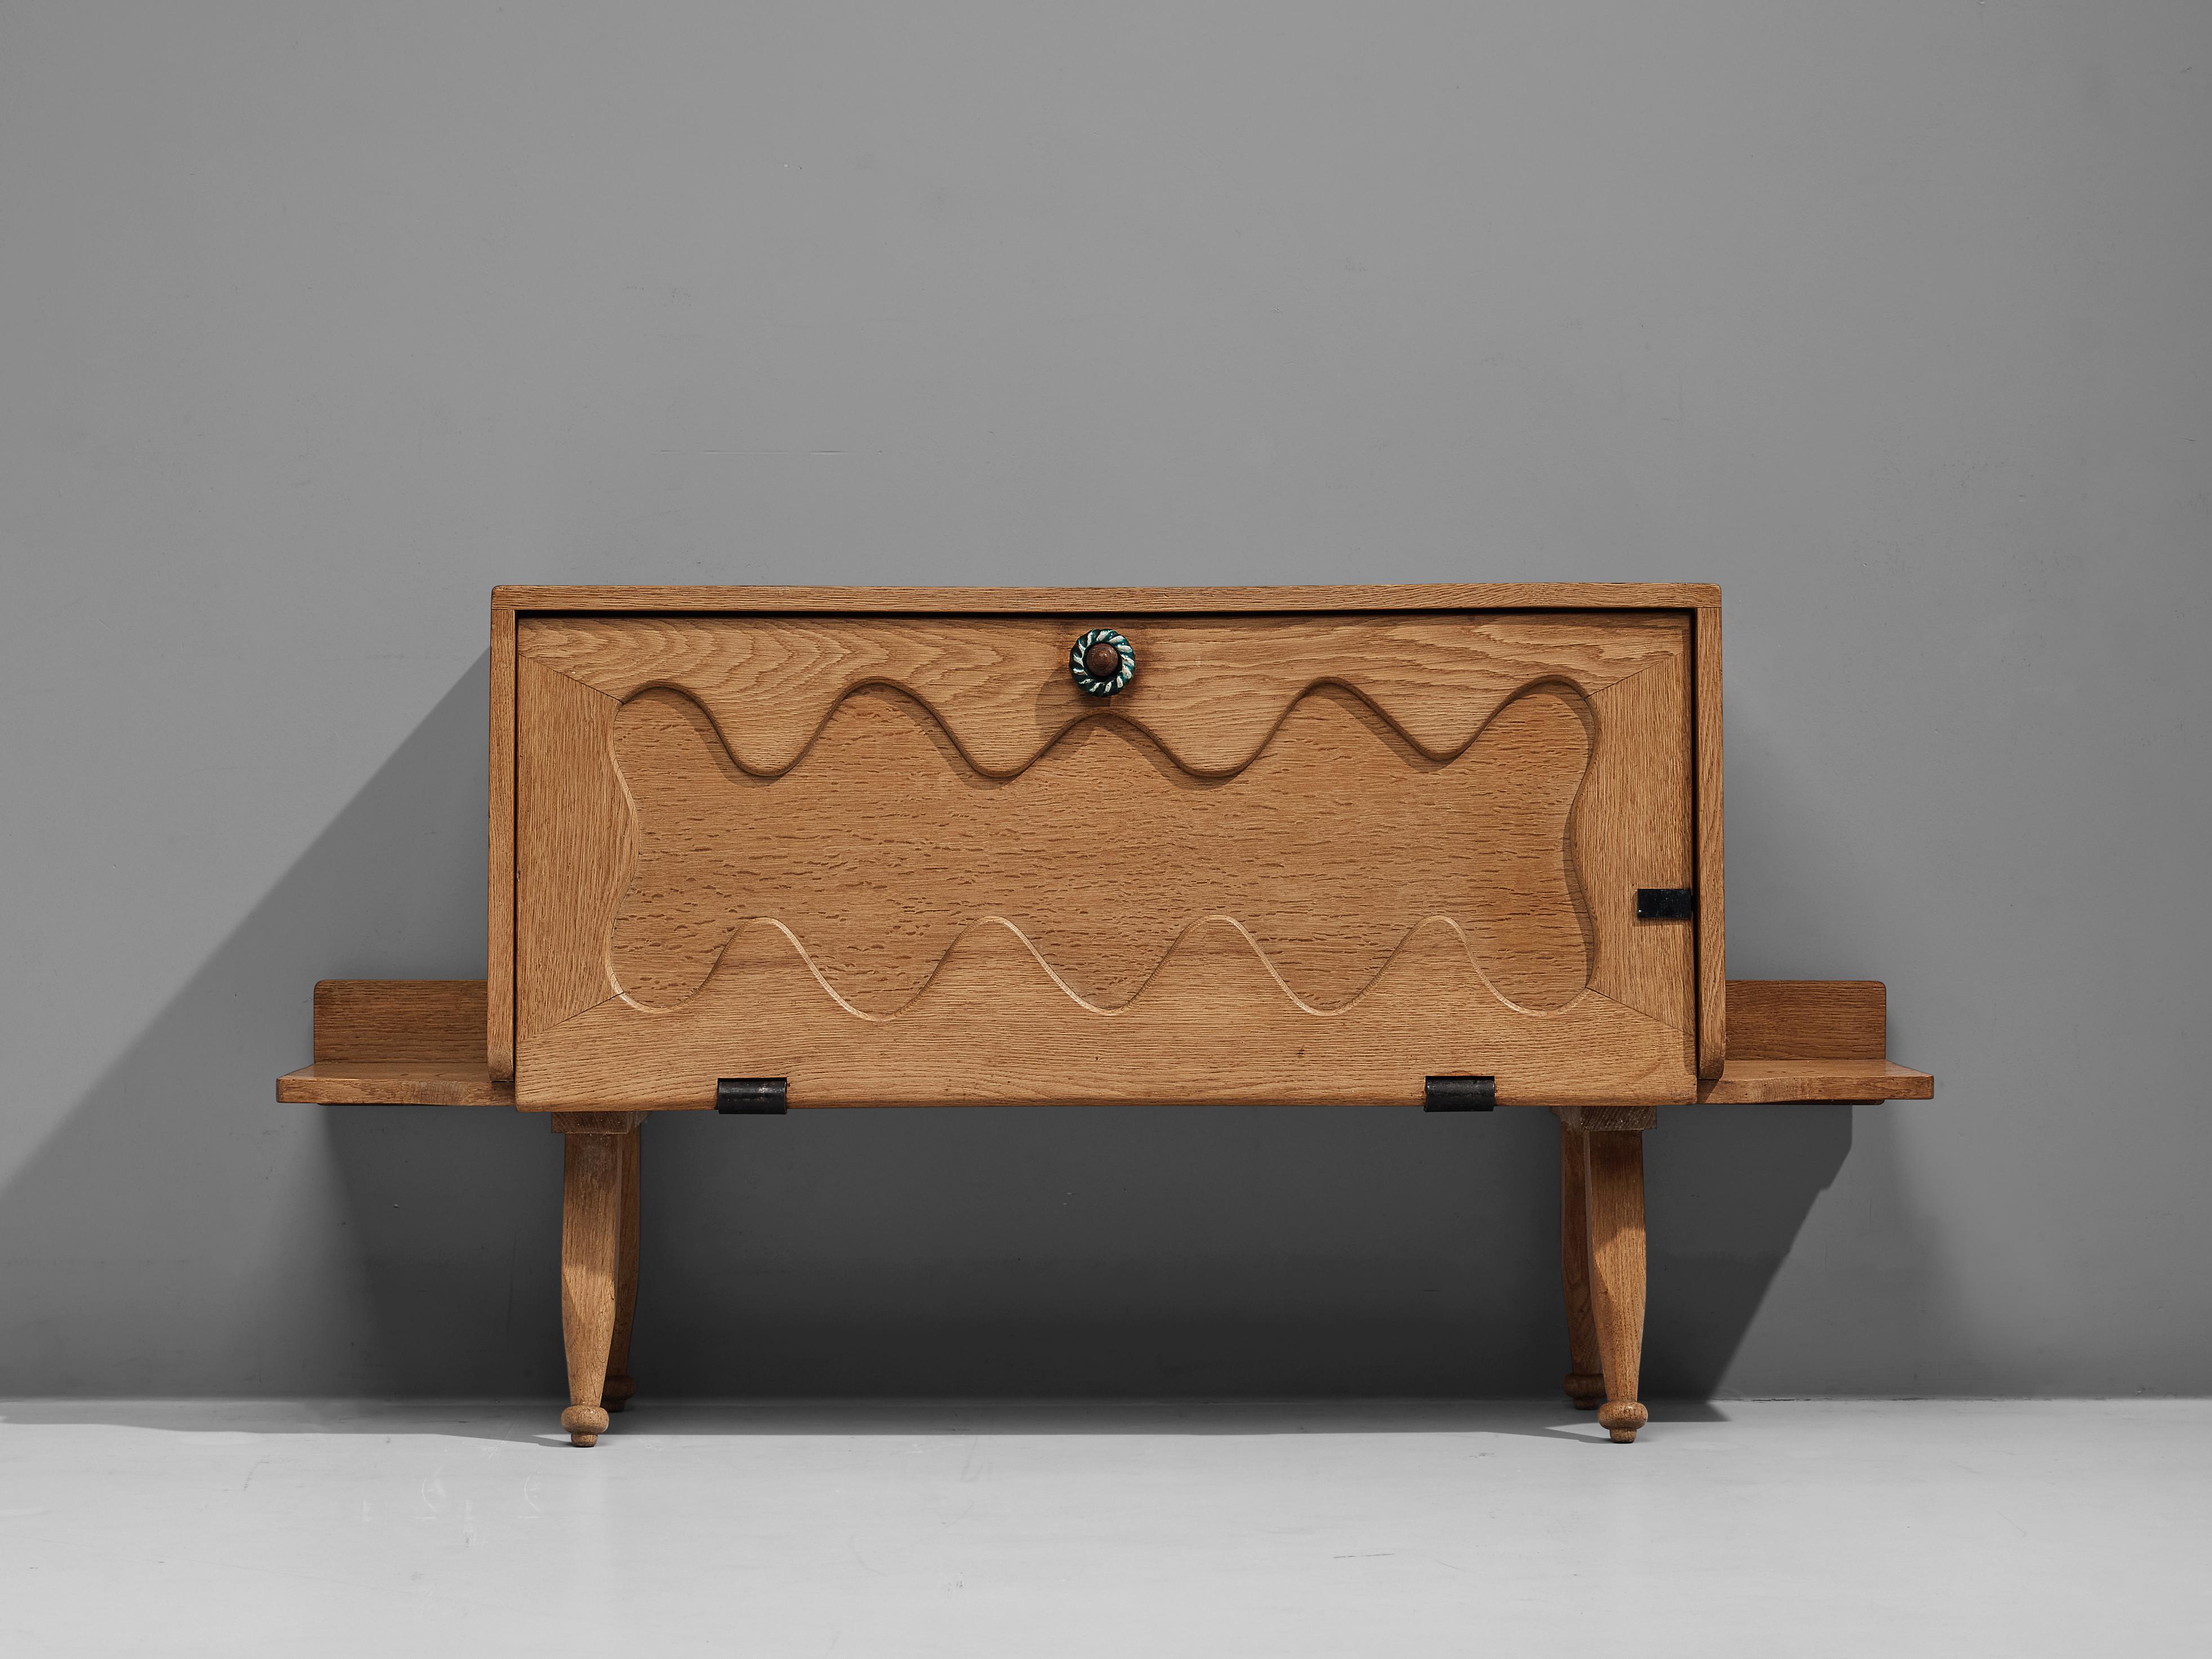 Guillerme & Chambron, sideboard with dry bar, oak, ceramic, France, 1960s

This charming sideboard is made by the designer duo Guillerme & Chambron. This item is a good example of excellent woodworking by virtue of the graphical designed door